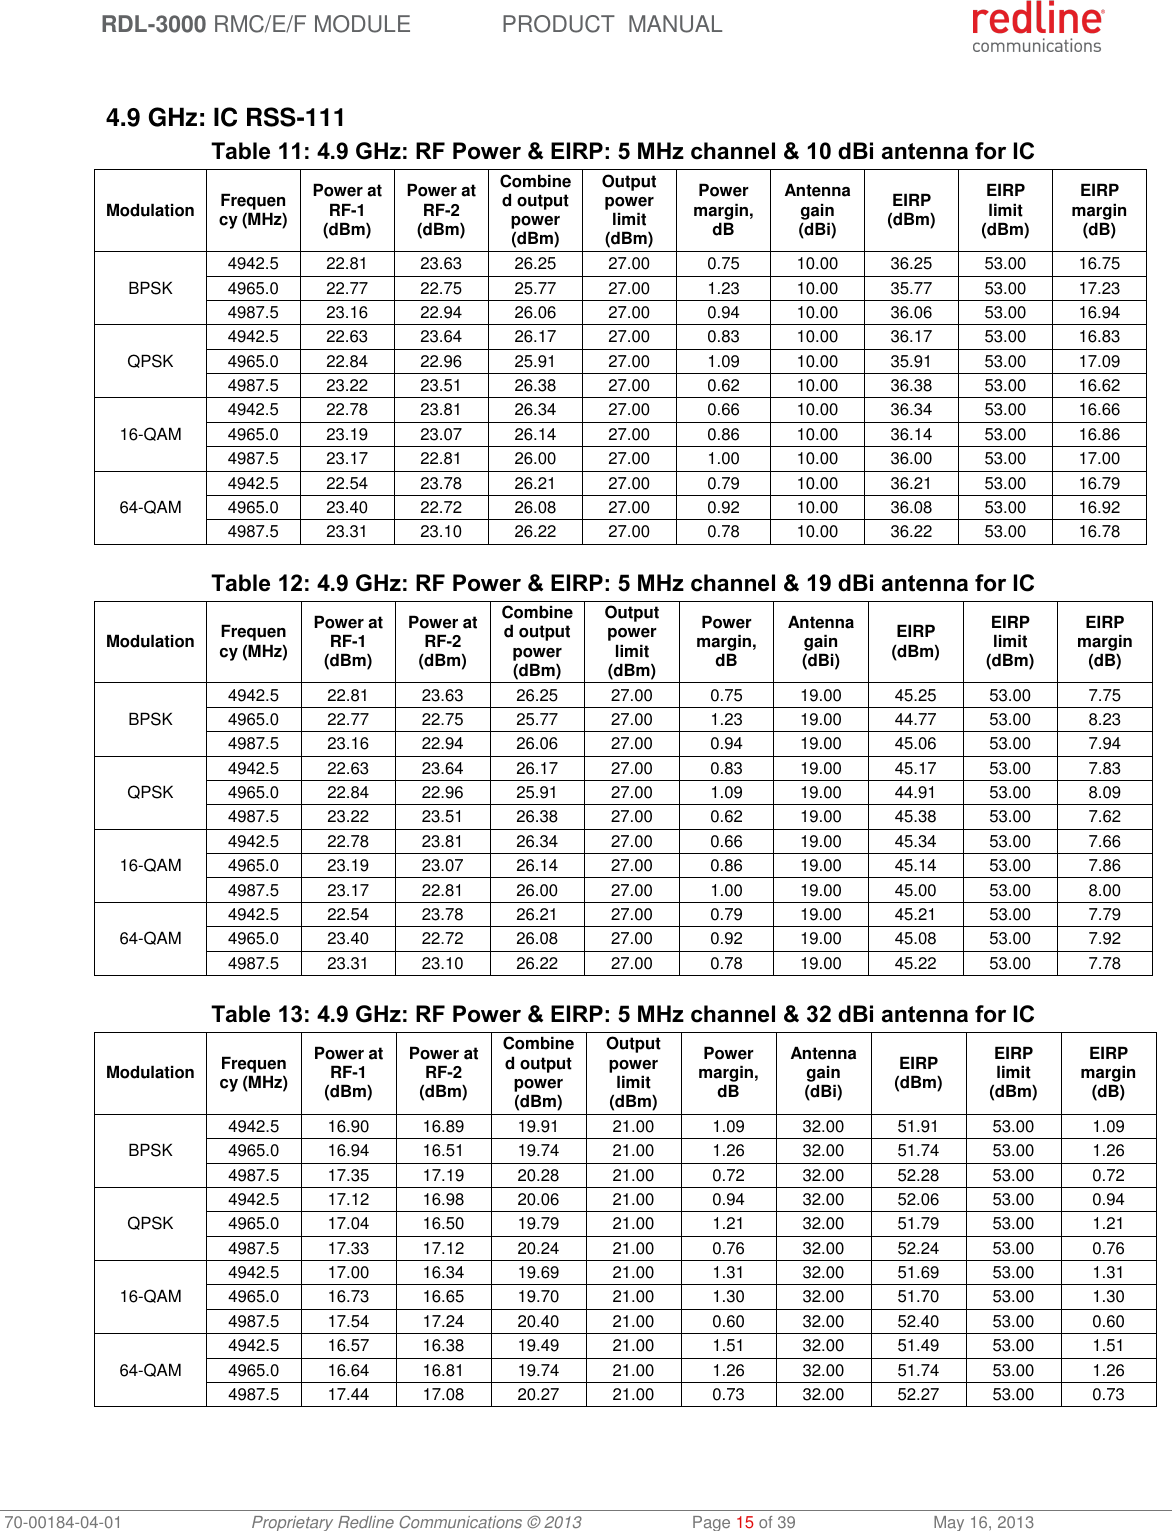  RDL-3000 RMC/E/F MODULE PRODUCT  MANUAL 70-00184-04-01 Proprietary Redline Communications © 2013  Page 15 of 39  May 16, 2013  4.9 GHz: IC RSS-111 Table 11: 4.9 GHz: RF Power &amp; EIRP: 5 MHz channel &amp; 10 dBi antenna for IC Modulation Frequency (MHz) Power at RF-1 (dBm) Power at RF-2 (dBm) Combined output power (dBm) Output power limit (dBm) Power margin, dB Antenna gain (dBi) EIRP (dBm) EIRP limit (dBm) EIRP margin (dB) BPSK 4942.5 22.81 23.63 26.25 27.00 0.75 10.00 36.25 53.00 16.75 4965.0 22.77 22.75 25.77 27.00 1.23 10.00 35.77 53.00 17.23 4987.5 23.16 22.94 26.06 27.00 0.94 10.00 36.06 53.00 16.94 QPSK 4942.5 22.63 23.64 26.17 27.00 0.83 10.00 36.17 53.00 16.83 4965.0 22.84 22.96 25.91 27.00 1.09 10.00 35.91 53.00 17.09 4987.5 23.22 23.51 26.38 27.00 0.62 10.00 36.38 53.00 16.62 16-QAM 4942.5 22.78 23.81 26.34 27.00 0.66 10.00 36.34 53.00 16.66 4965.0 23.19 23.07 26.14 27.00 0.86 10.00 36.14 53.00 16.86 4987.5 23.17 22.81 26.00 27.00 1.00 10.00 36.00 53.00 17.00 64-QAM 4942.5 22.54 23.78 26.21 27.00 0.79 10.00 36.21 53.00 16.79 4965.0 23.40 22.72 26.08 27.00 0.92 10.00 36.08 53.00 16.92 4987.5 23.31 23.10 26.22 27.00 0.78 10.00 36.22 53.00 16.78  Table 12: 4.9 GHz: RF Power &amp; EIRP: 5 MHz channel &amp; 19 dBi antenna for IC Modulation Frequency (MHz) Power at RF-1 (dBm) Power at RF-2 (dBm) Combined output power (dBm) Output power limit (dBm) Power margin, dB Antenna gain (dBi) EIRP (dBm) EIRP limit (dBm) EIRP margin (dB) BPSK 4942.5 22.81 23.63 26.25 27.00 0.75 19.00 45.25 53.00 7.75 4965.0 22.77 22.75 25.77 27.00 1.23 19.00 44.77 53.00 8.23 4987.5 23.16 22.94 26.06 27.00 0.94 19.00 45.06 53.00 7.94 QPSK 4942.5 22.63 23.64 26.17 27.00 0.83 19.00 45.17 53.00 7.83 4965.0 22.84 22.96 25.91 27.00 1.09 19.00 44.91 53.00 8.09 4987.5 23.22 23.51 26.38 27.00 0.62 19.00 45.38 53.00 7.62 16-QAM 4942.5 22.78 23.81 26.34 27.00 0.66 19.00 45.34 53.00 7.66 4965.0 23.19 23.07 26.14 27.00 0.86 19.00 45.14 53.00 7.86 4987.5 23.17 22.81 26.00 27.00 1.00 19.00 45.00 53.00 8.00 64-QAM 4942.5 22.54 23.78 26.21 27.00 0.79 19.00 45.21 53.00 7.79 4965.0 23.40 22.72 26.08 27.00 0.92 19.00 45.08 53.00 7.92 4987.5 23.31 23.10 26.22 27.00 0.78 19.00 45.22 53.00 7.78  Table 13: 4.9 GHz: RF Power &amp; EIRP: 5 MHz channel &amp; 32 dBi antenna for IC Modulation Frequency (MHz) Power at RF-1 (dBm) Power at RF-2 (dBm) Combined output power (dBm) Output power limit (dBm) Power margin, dB Antenna gain (dBi) EIRP (dBm) EIRP limit (dBm) EIRP margin (dB) BPSK 4942.5 16.90 16.89 19.91 21.00 1.09 32.00 51.91 53.00 1.09 4965.0 16.94 16.51 19.74 21.00 1.26 32.00 51.74 53.00 1.26 4987.5 17.35 17.19 20.28 21.00 0.72 32.00 52.28 53.00 0.72 QPSK 4942.5 17.12 16.98 20.06 21.00 0.94 32.00 52.06 53.00 0.94 4965.0 17.04 16.50 19.79 21.00 1.21 32.00 51.79 53.00 1.21 4987.5 17.33 17.12 20.24 21.00 0.76 32.00 52.24 53.00 0.76 16-QAM 4942.5 17.00 16.34 19.69 21.00 1.31 32.00 51.69 53.00 1.31 4965.0 16.73 16.65 19.70 21.00 1.30 32.00 51.70 53.00 1.30 4987.5 17.54 17.24 20.40 21.00 0.60 32.00 52.40 53.00 0.60 64-QAM 4942.5 16.57 16.38 19.49 21.00 1.51 32.00 51.49 53.00 1.51 4965.0 16.64 16.81 19.74 21.00 1.26 32.00 51.74 53.00 1.26 4987.5 17.44 17.08 20.27 21.00 0.73 32.00 52.27 53.00 0.73  